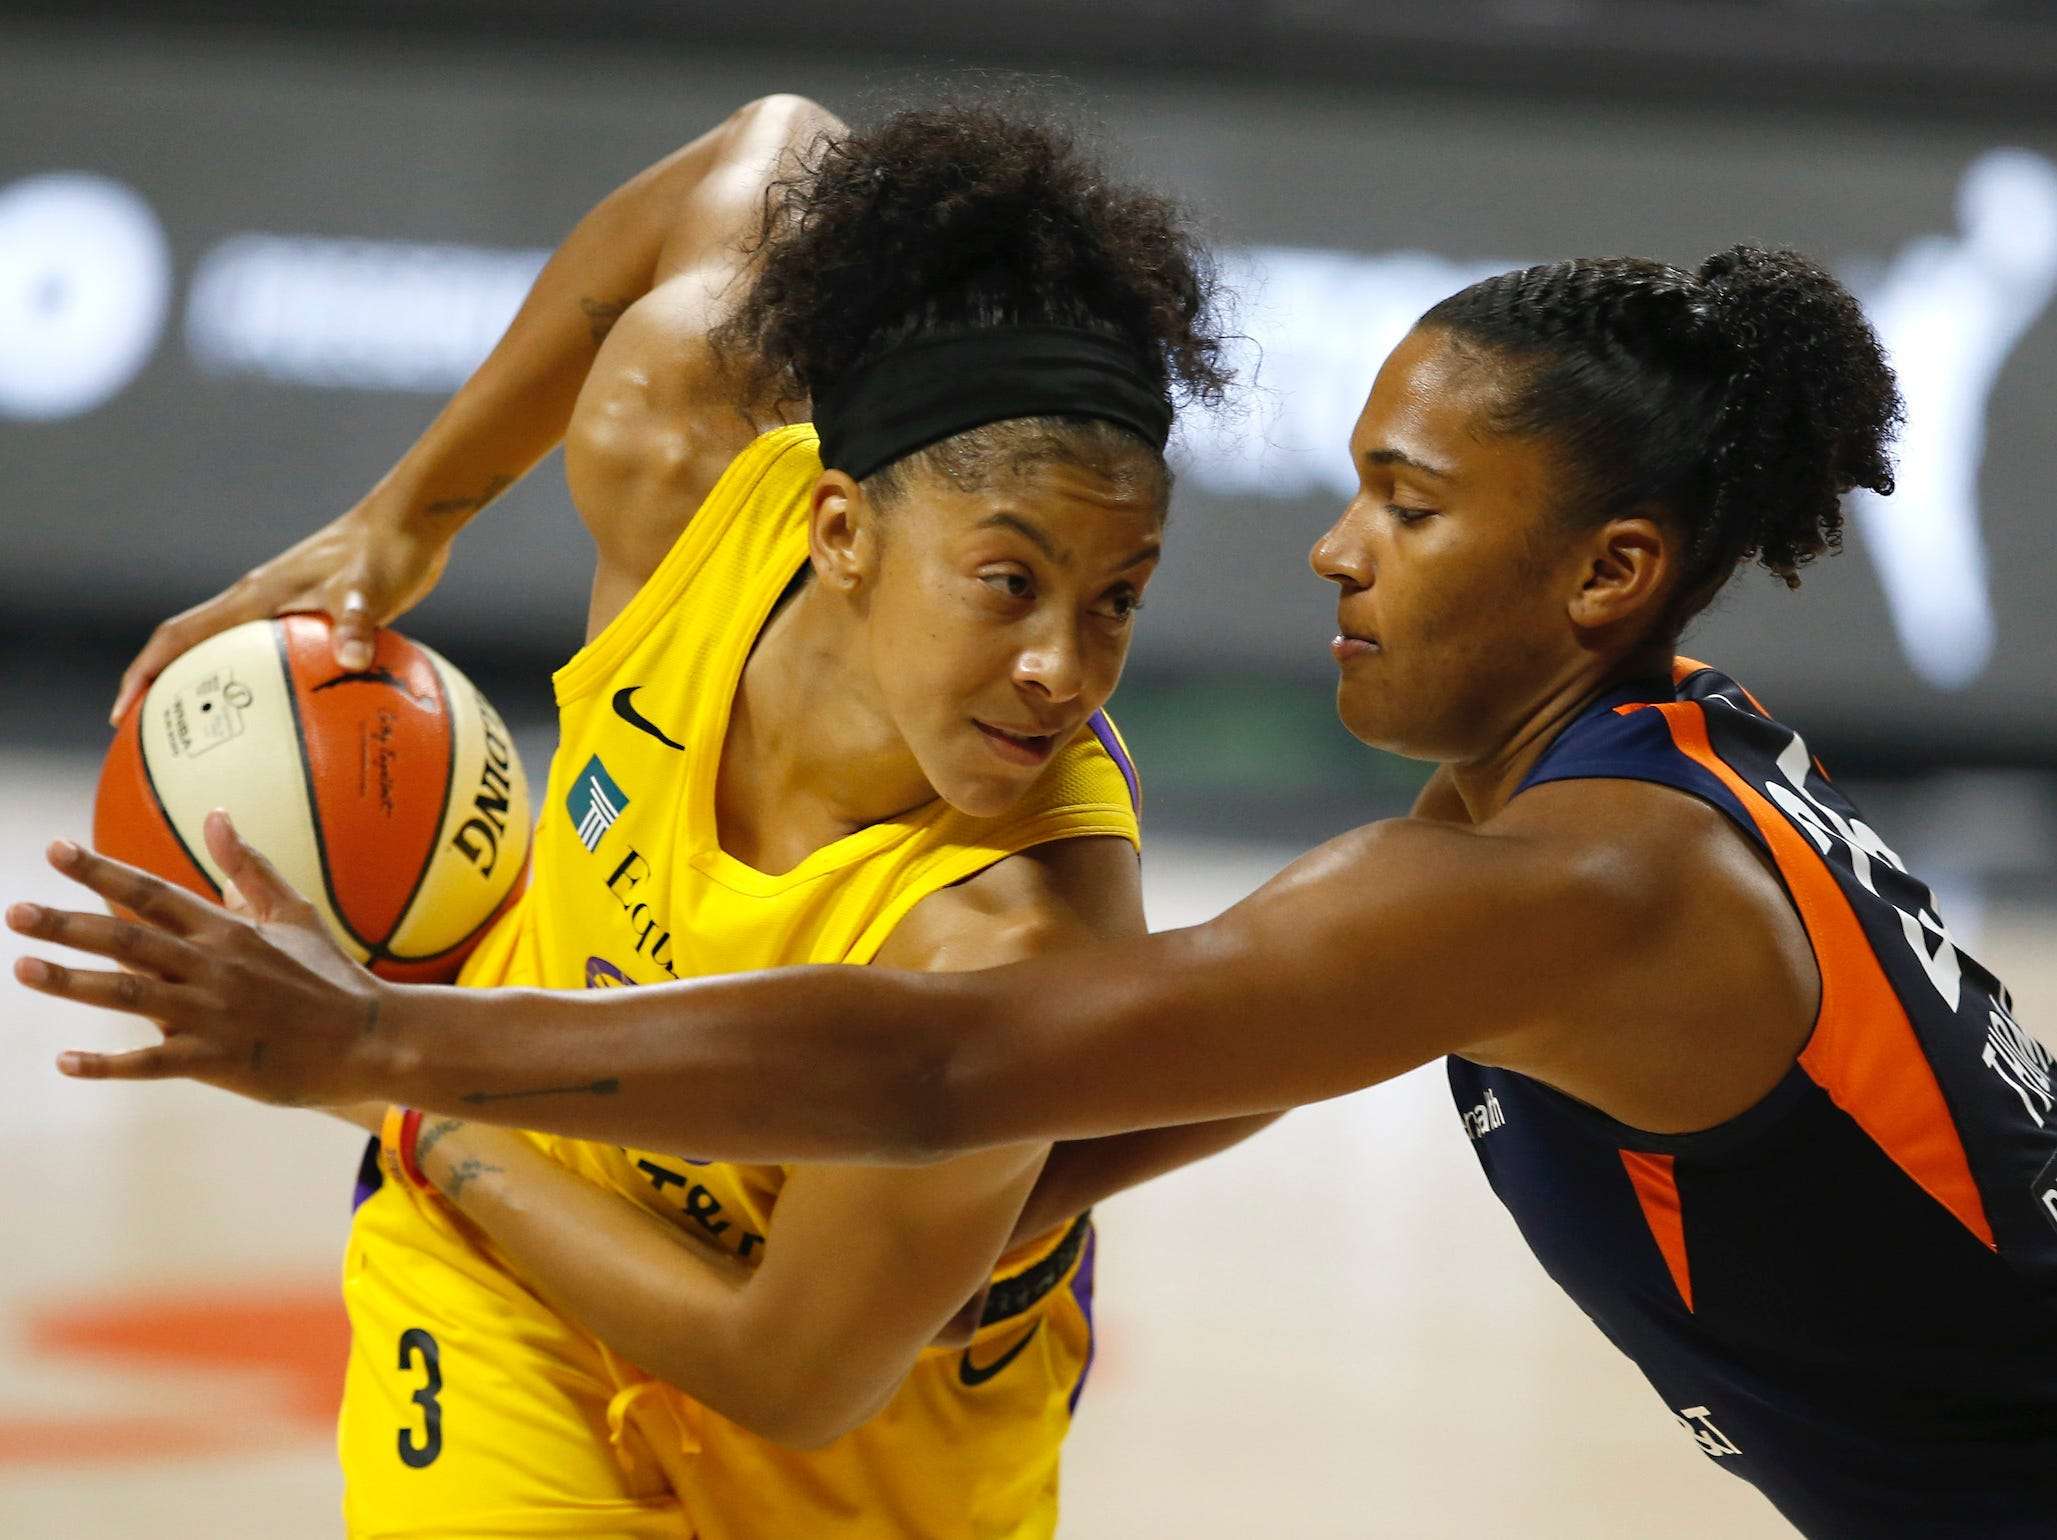 WNBA icon Candace Parker hinted that she has specific players in mind